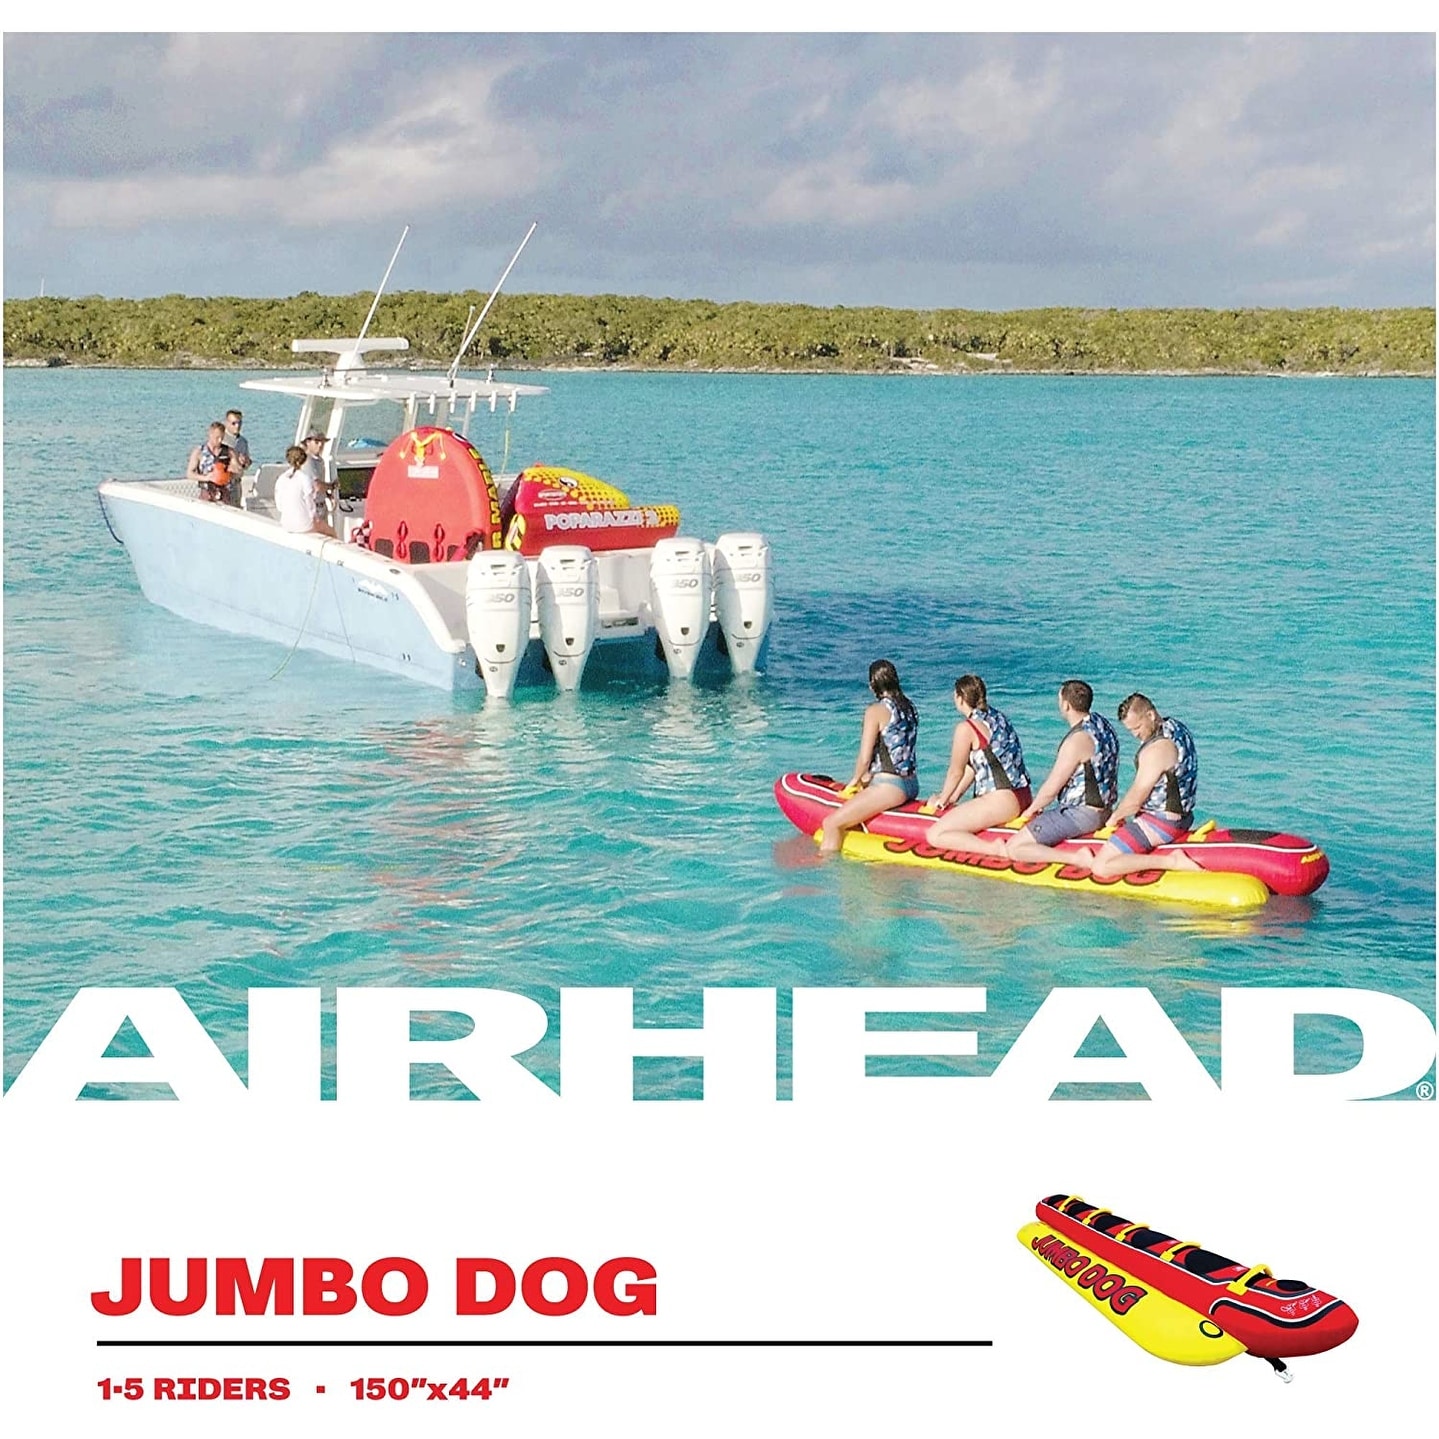 Airhead HD-5 Jumbo Hot Dog Person Rider Inflatable Towable Lake Boat Tube  34.5 Bed Bath  Beyond 36762087